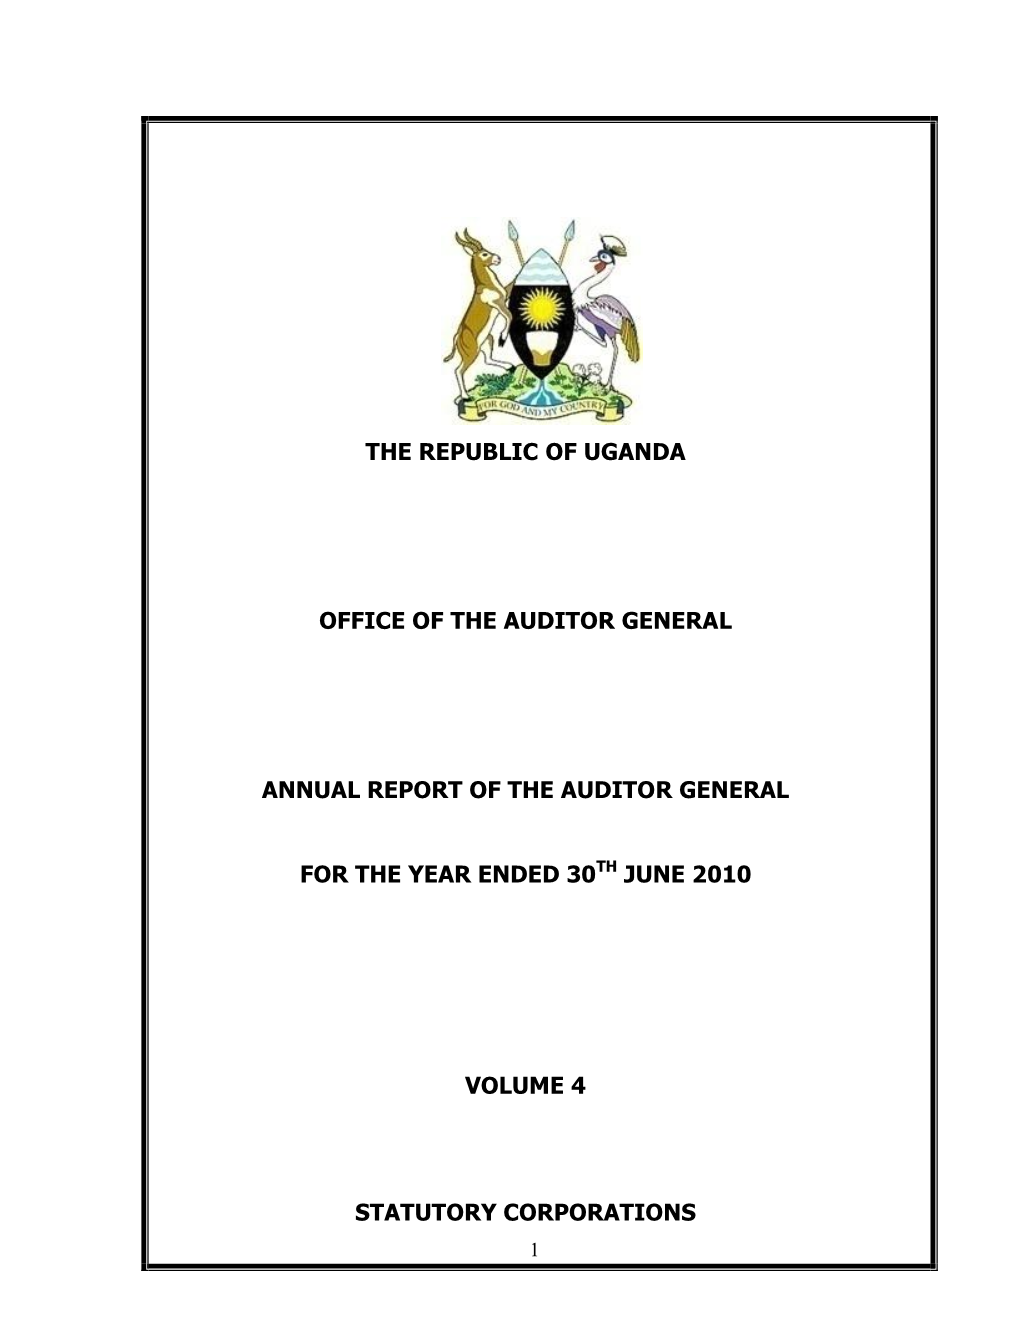 The Republic of Uganda Office of the Auditor General